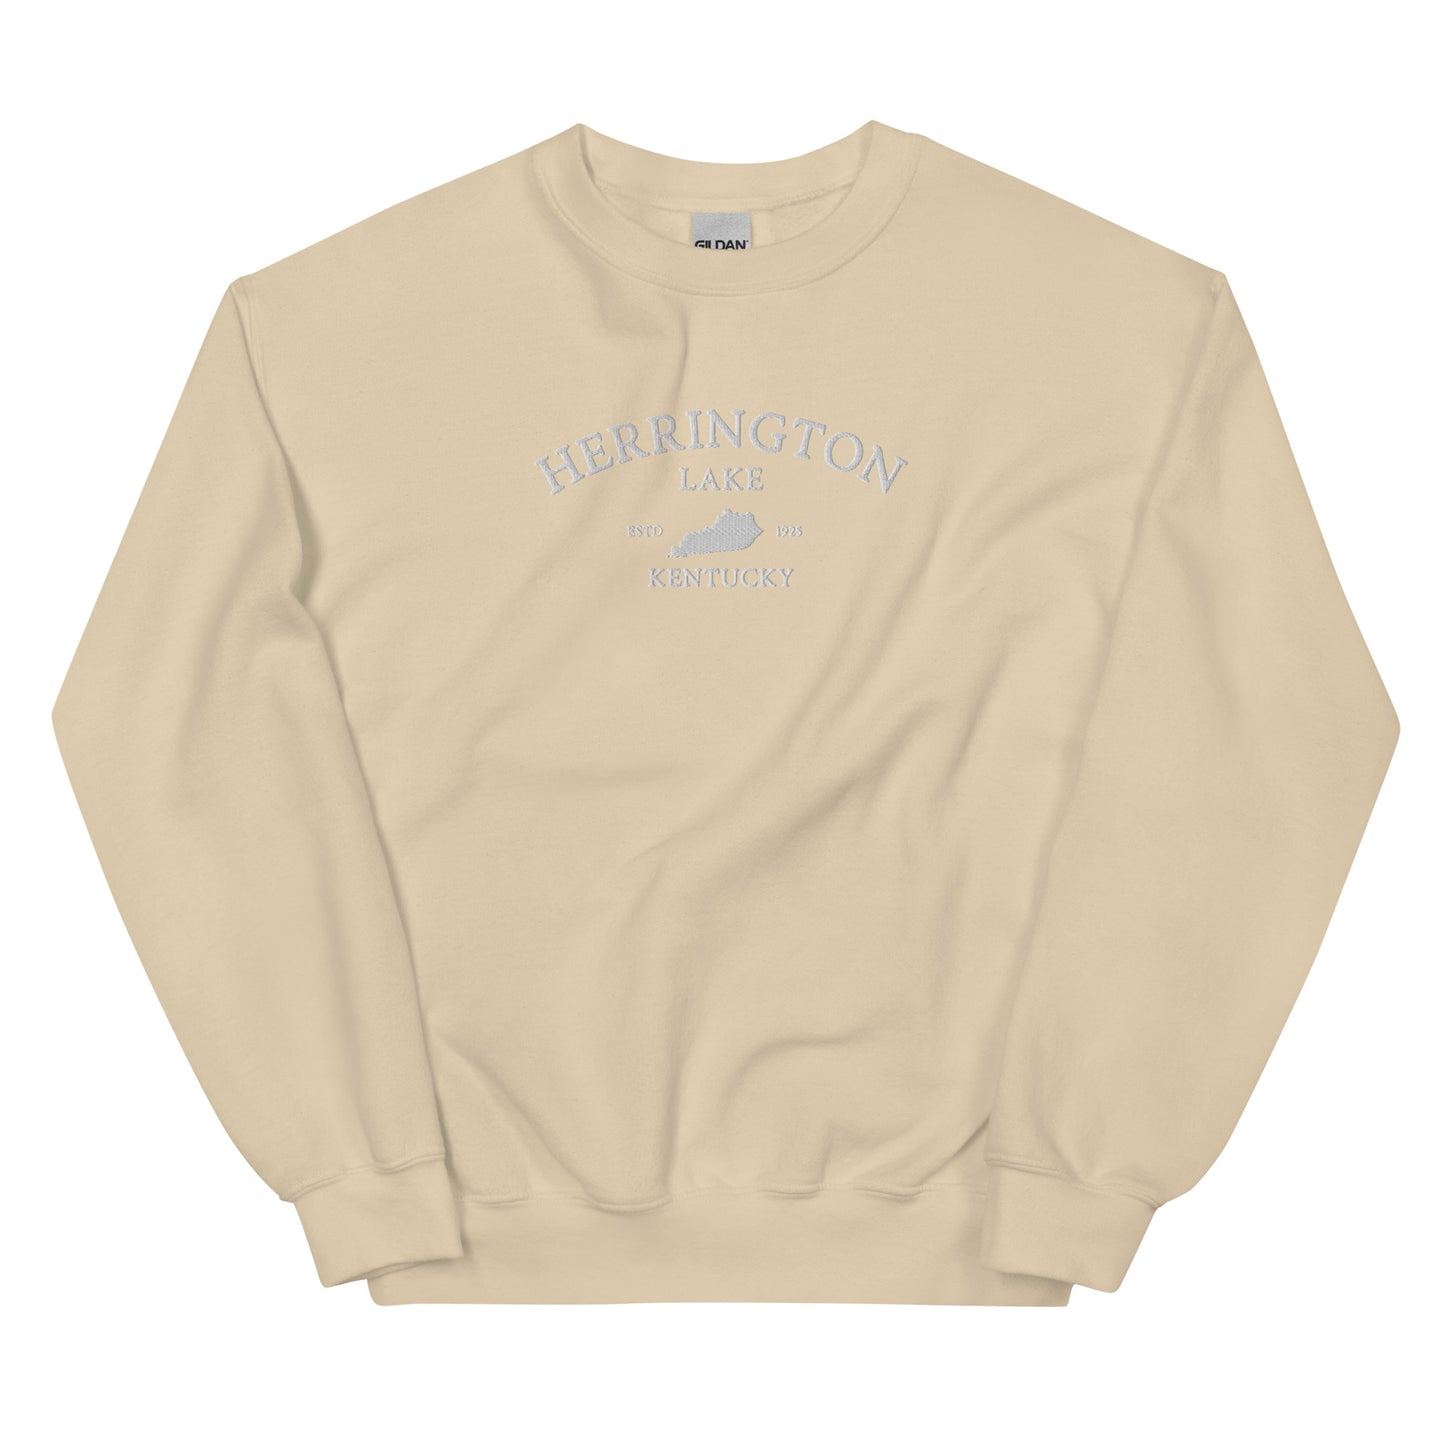 "Simply Herrington" Collection Embroidered Sweatshirt